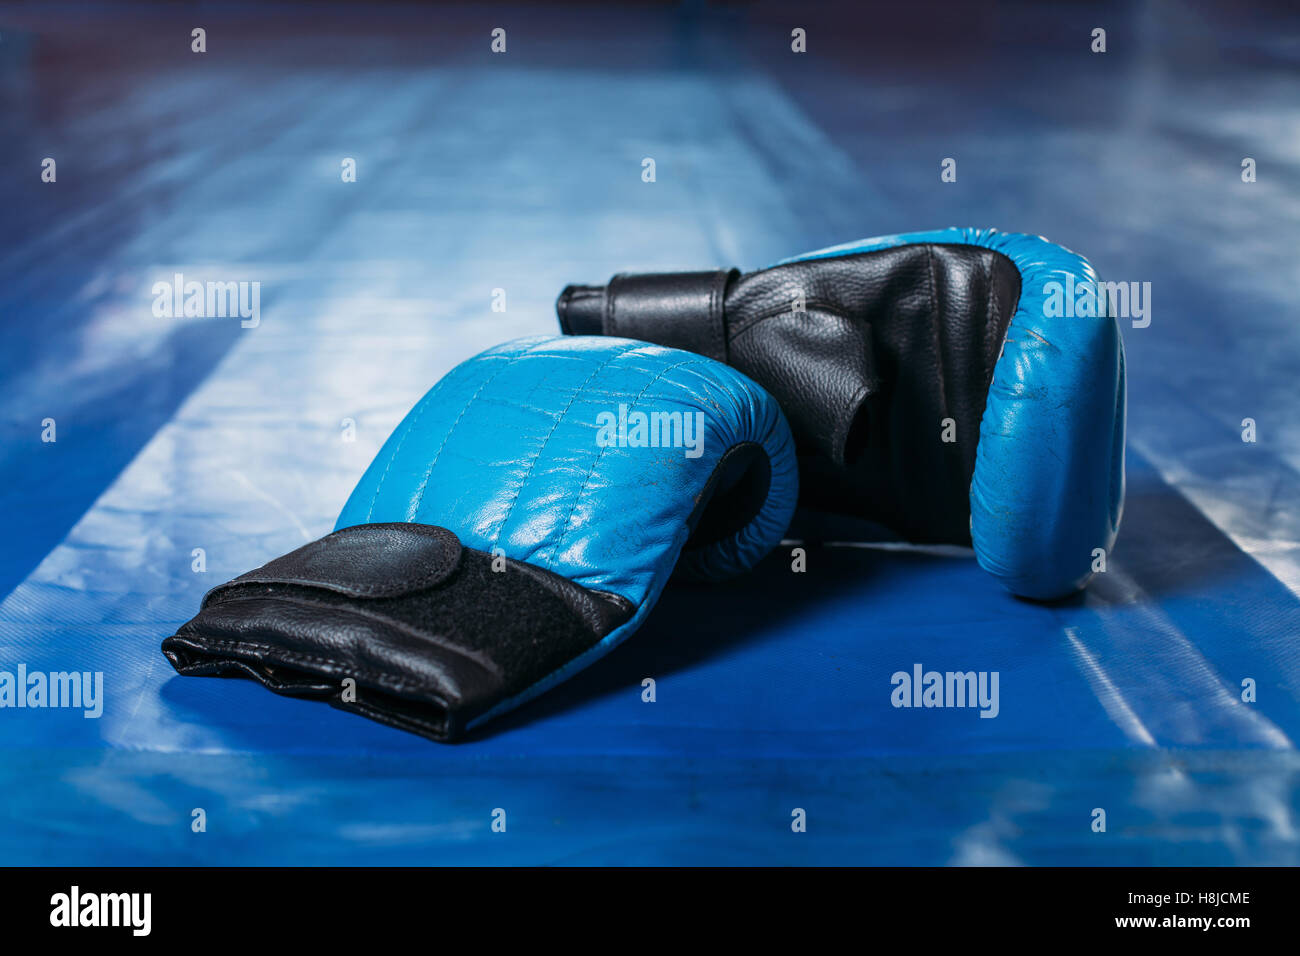 Boxing gloves on the floor of the ring. Stock Photo